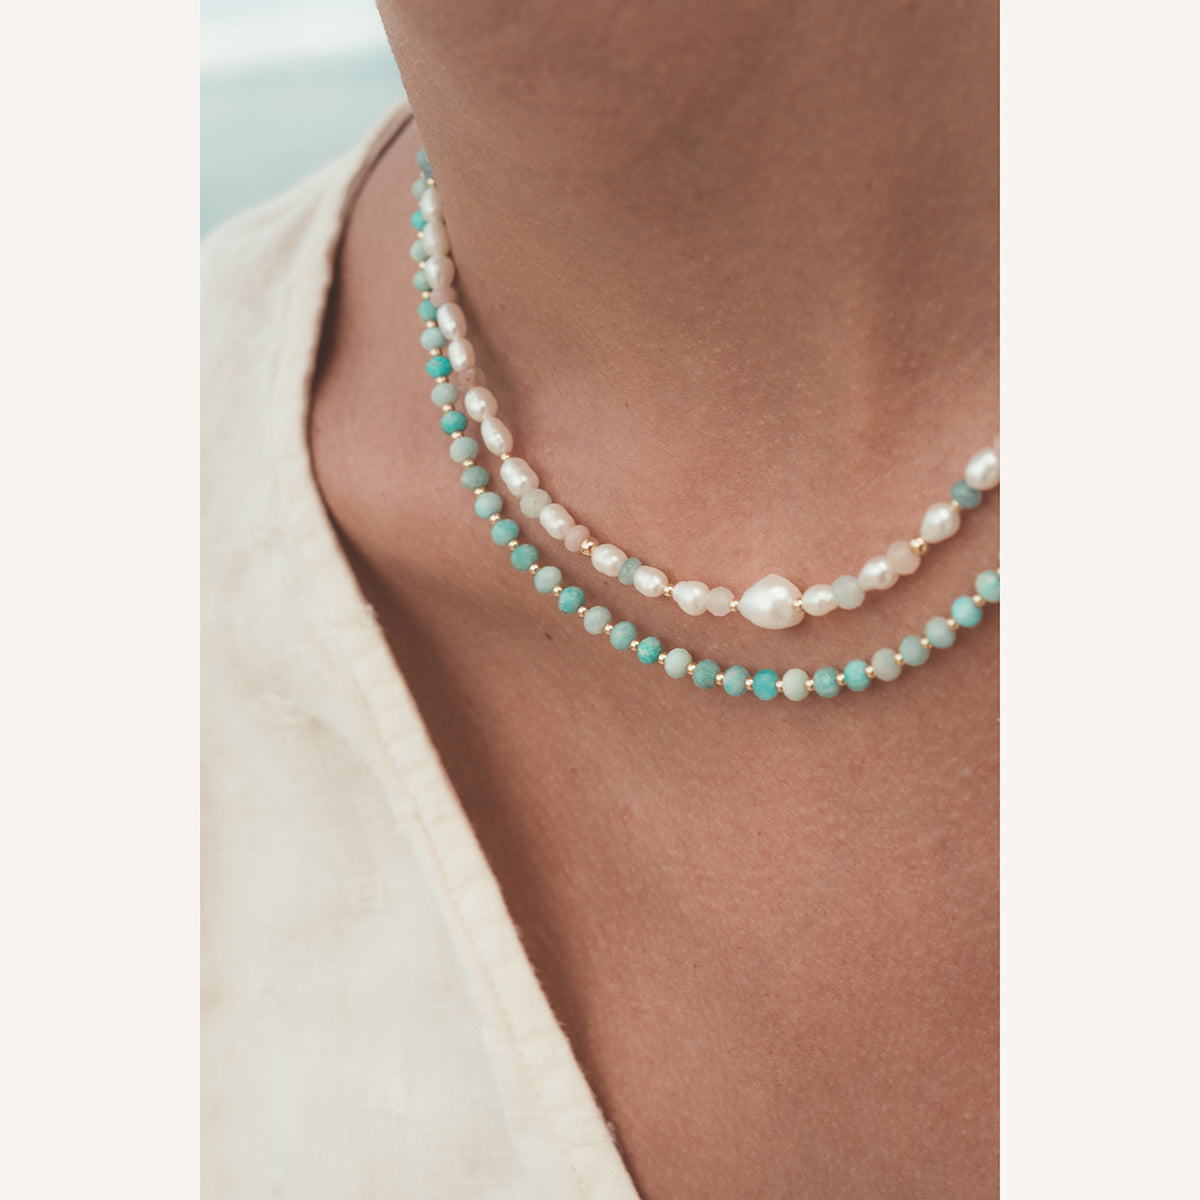 C.W.James Elodie Amazonite necklace and Harmony pearl necklace on model close up